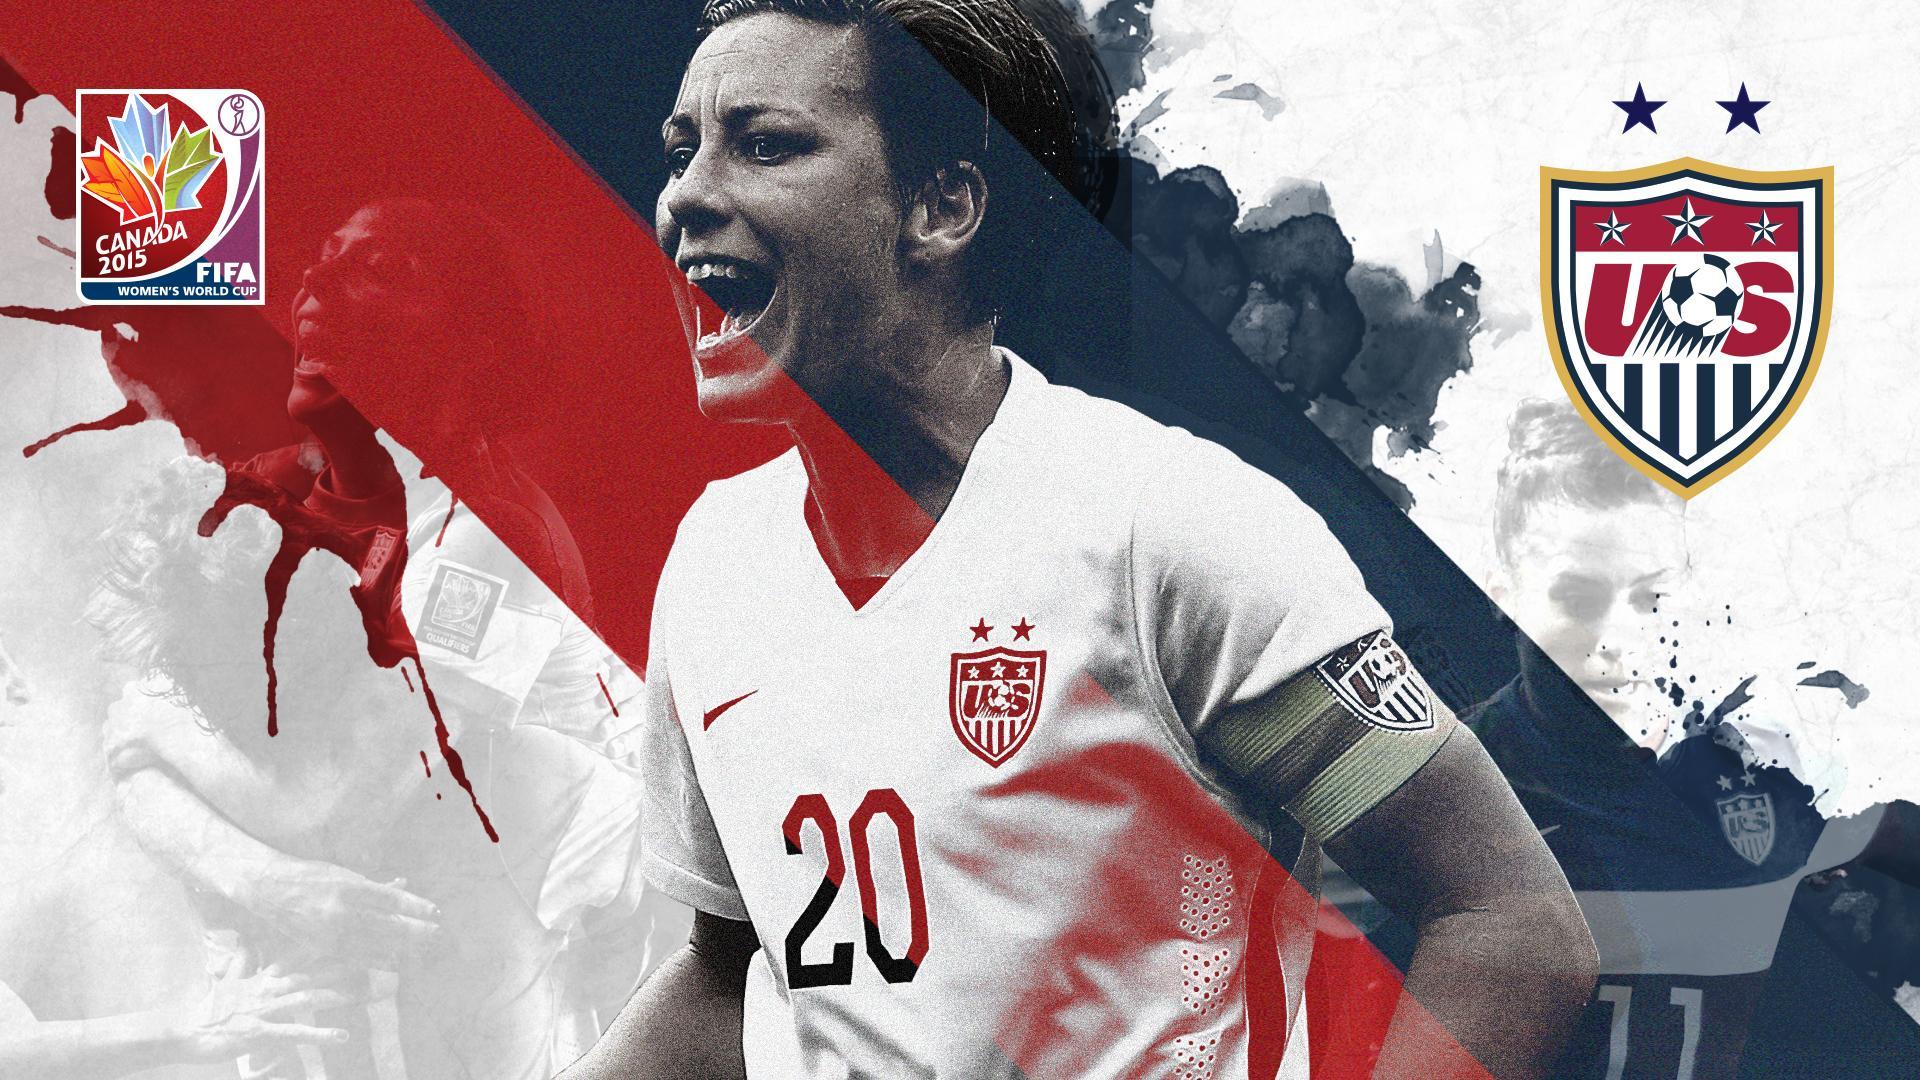 Olympic gold vs. World Cup glory weighs on U.S. women's team